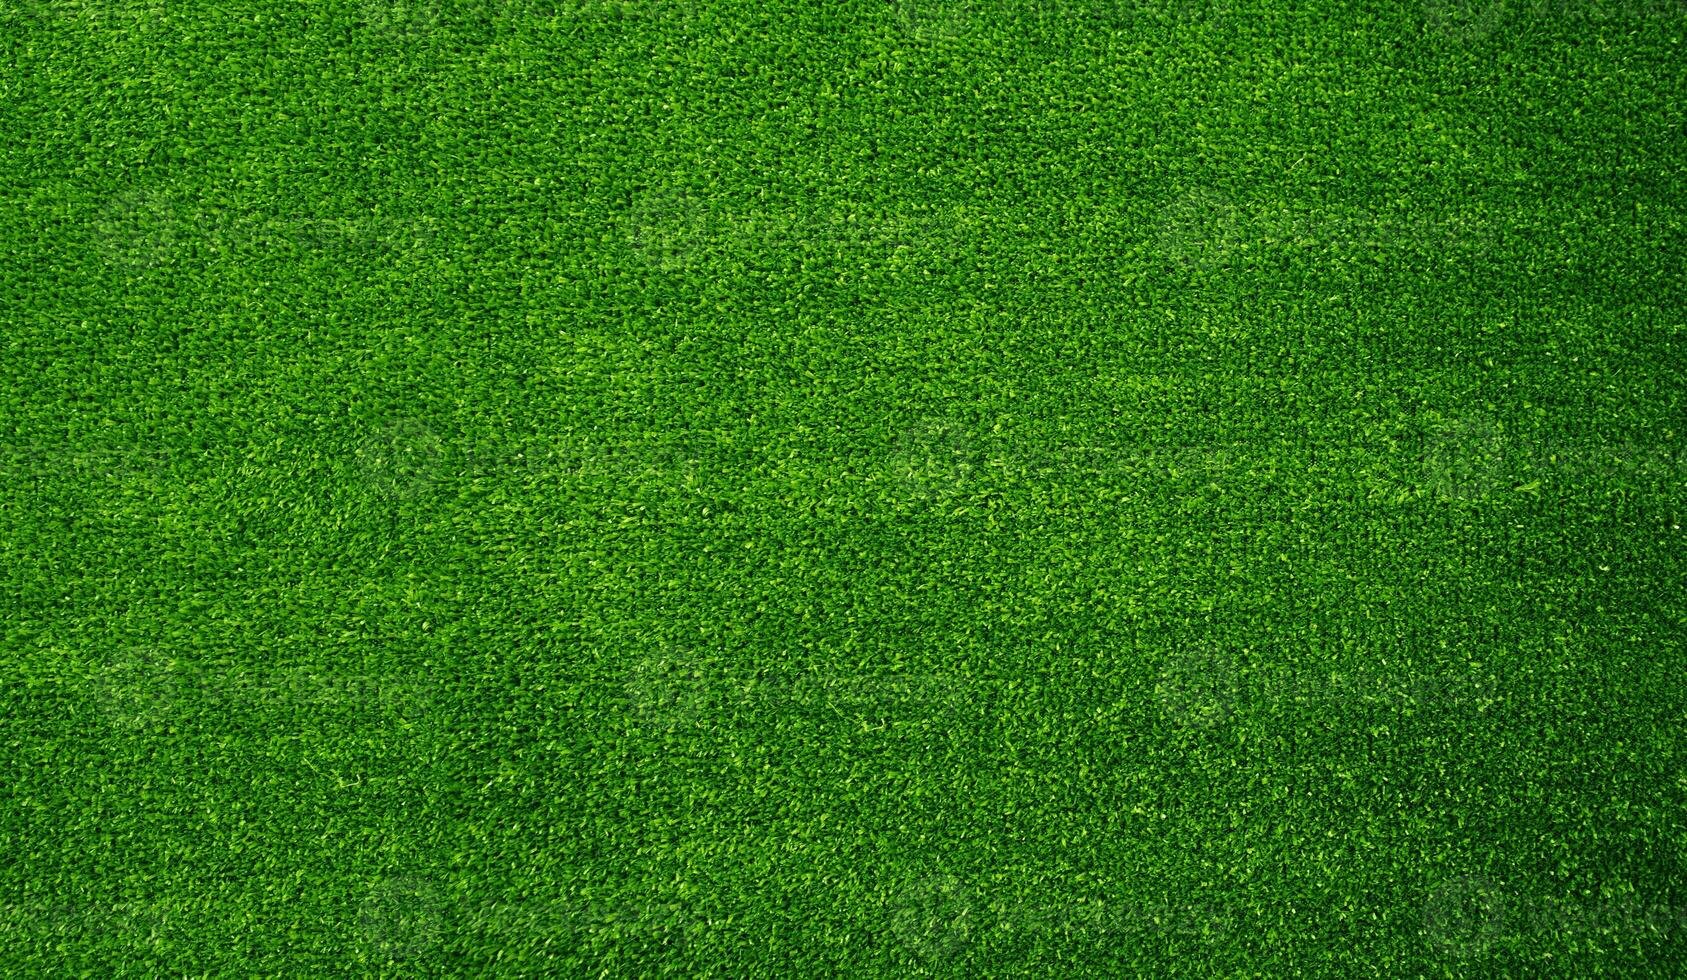 Green grass texture background grass garden concept used for making green background football pitch, Grass Golf, green lawn pattern textured background.... photo